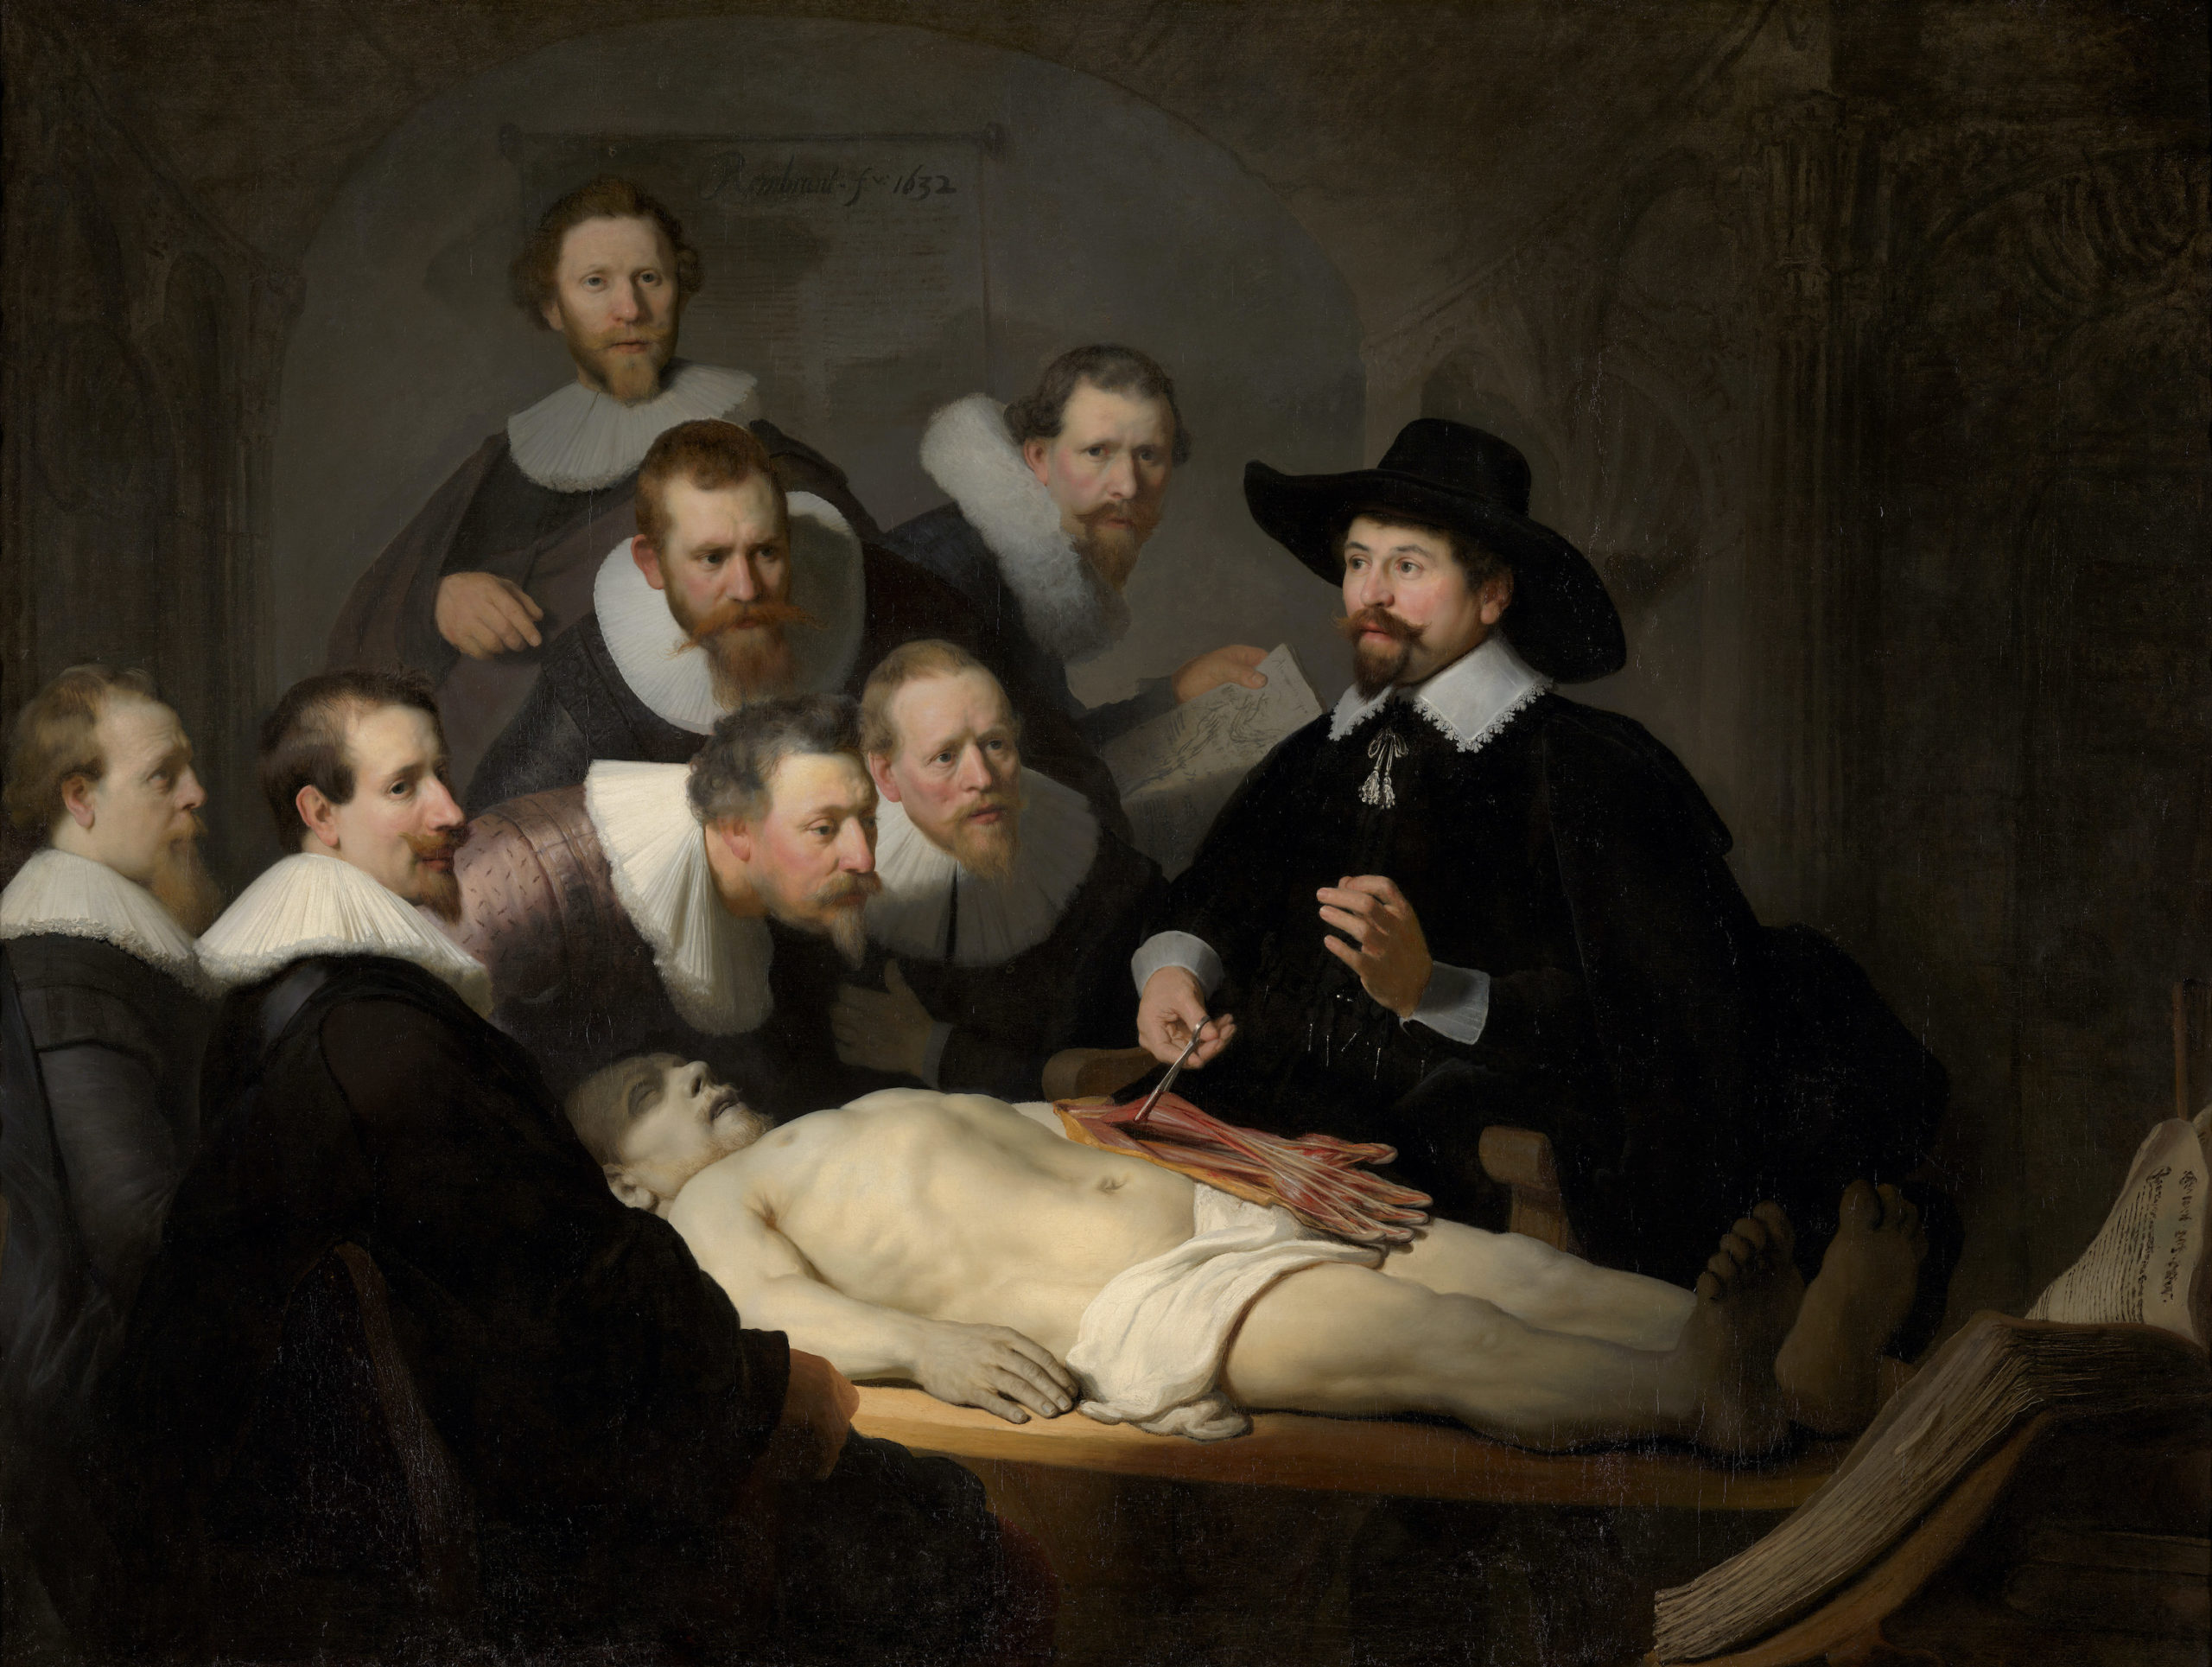 Rembrandt van Rijn, The Anatomy Lesson of Dr. Tulp, 1632, oil on canvas, 169.5 x 216.5 cm (Mauritshuis, The Hague, Netherlands)